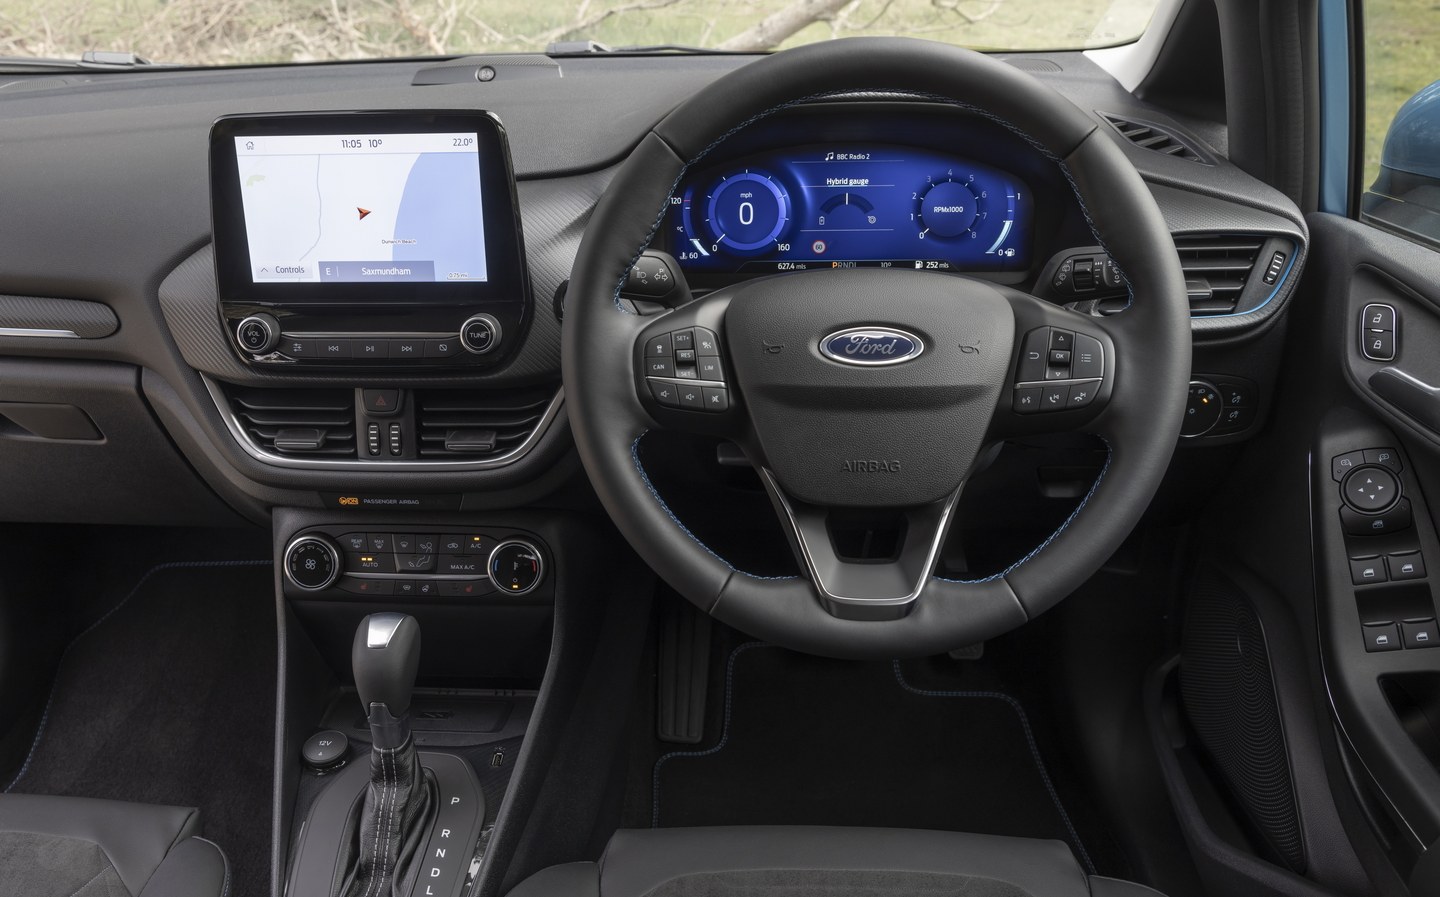 Ford Fiesta Review For Sale Interior Models  News in Australia   CarsGuide